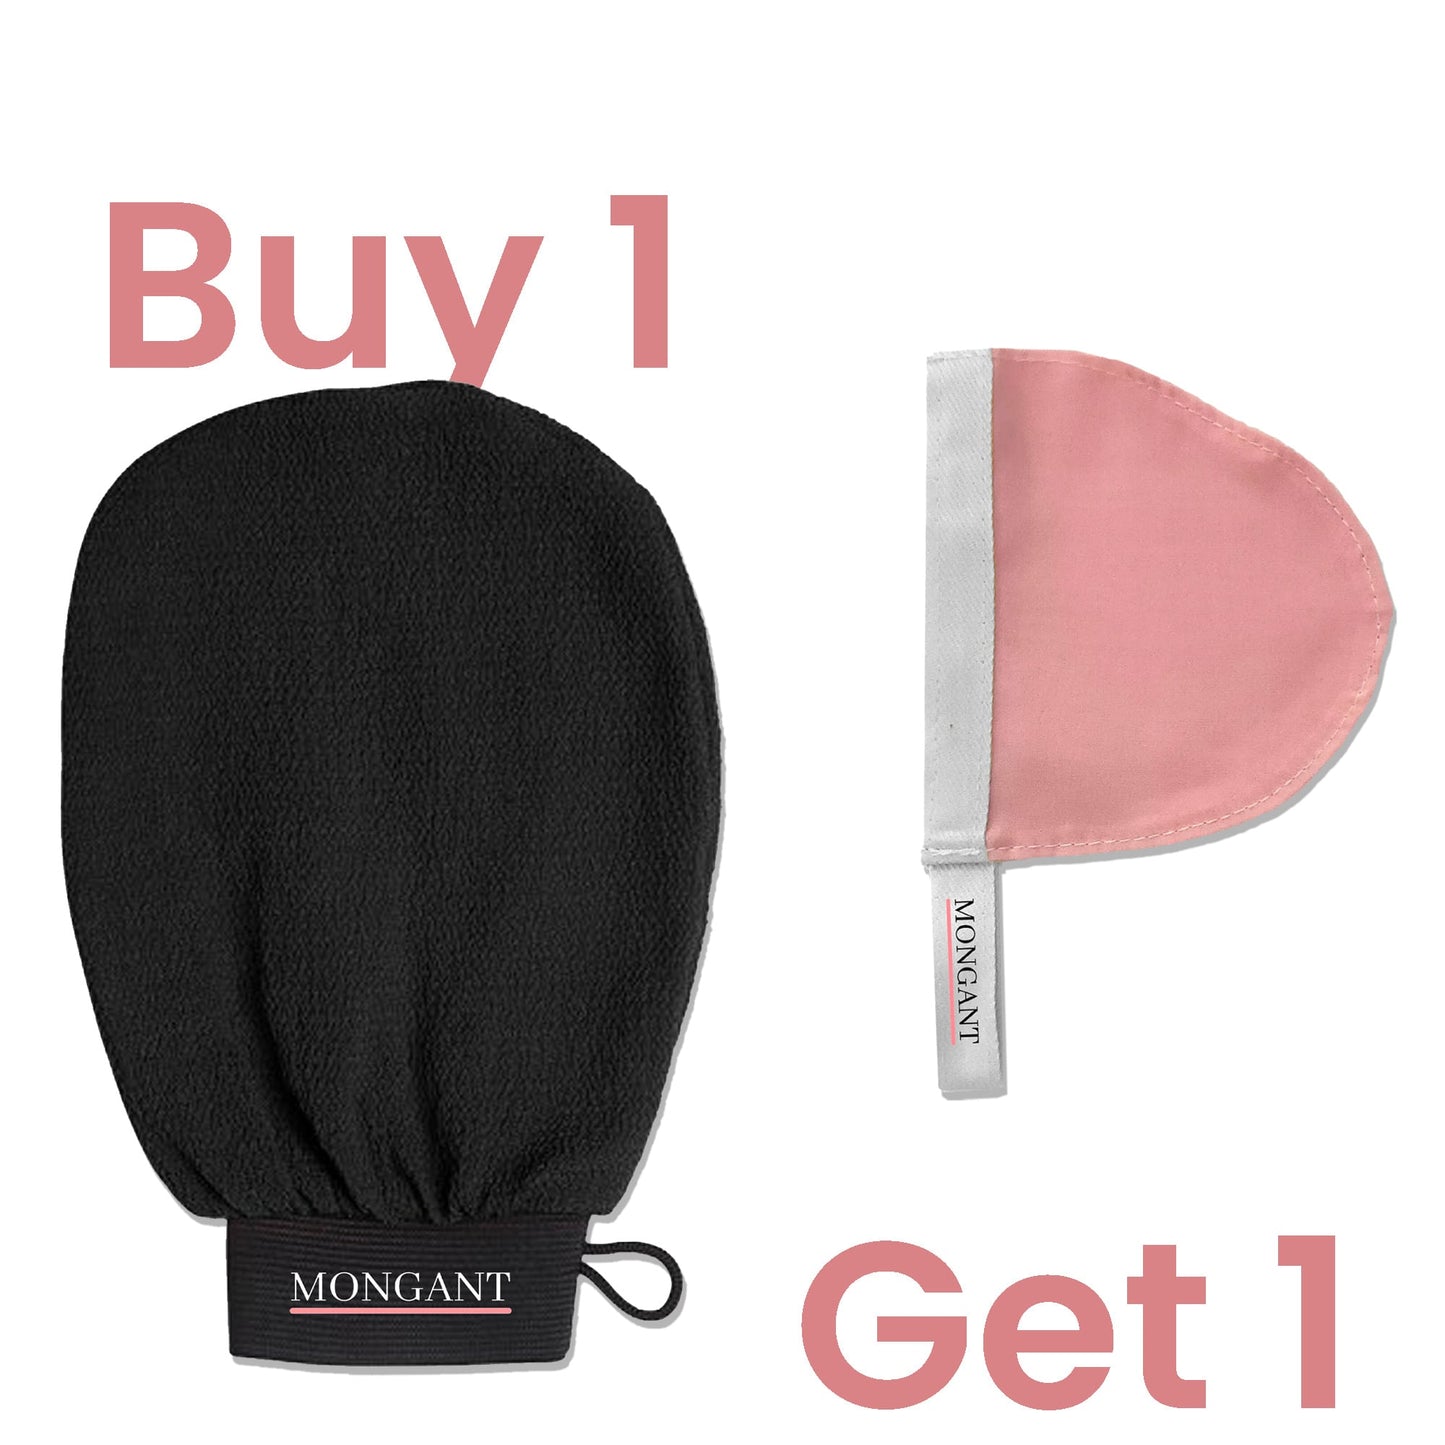 Exfoliating Glove Exclusive Offer